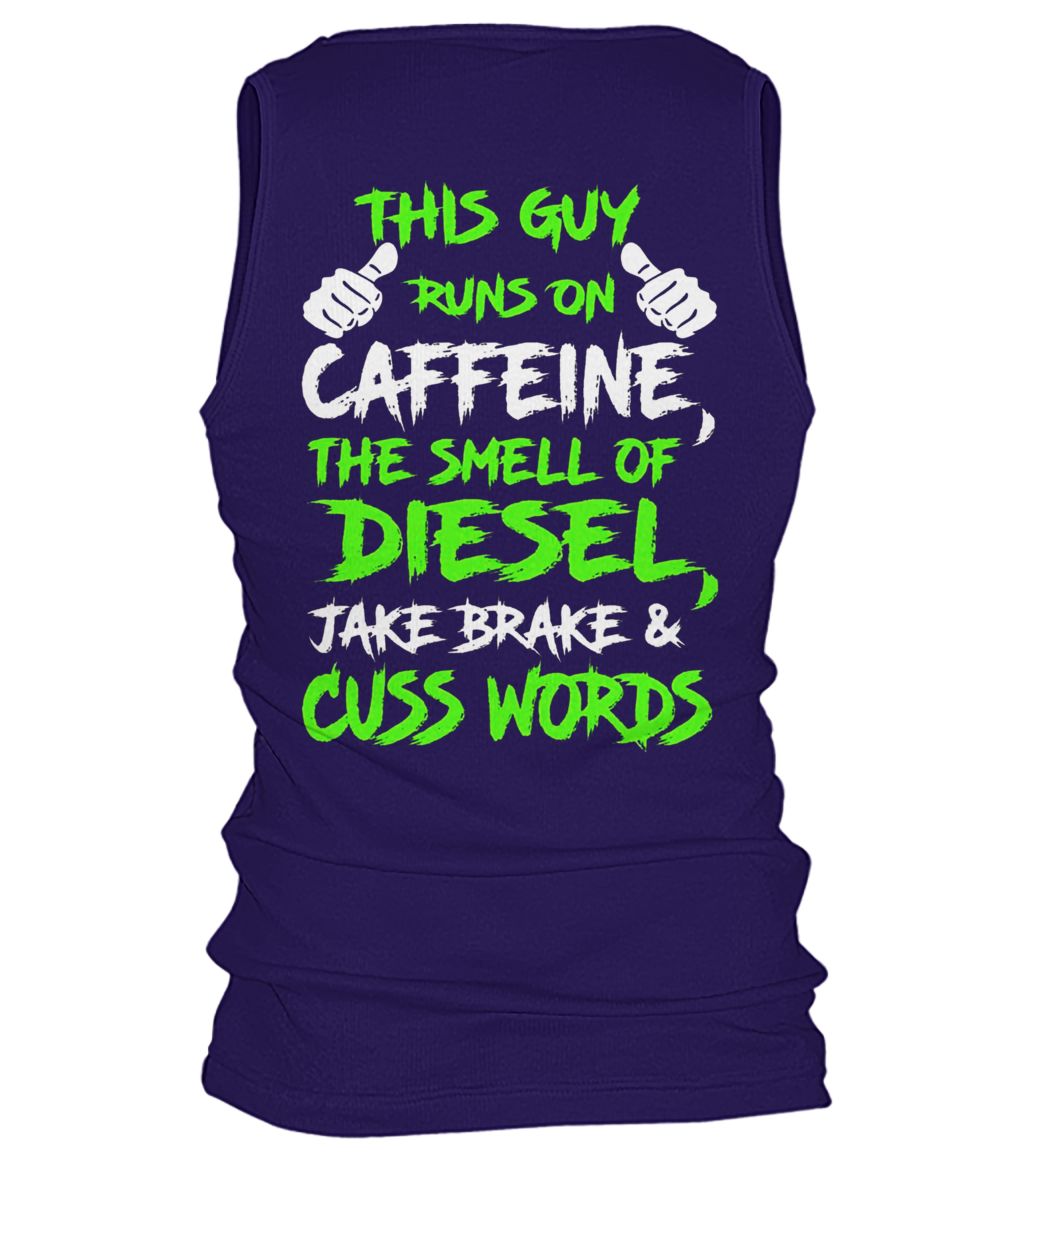 This guy runs on caffeine the smell of diesel jake brake and cuss words men's tank top